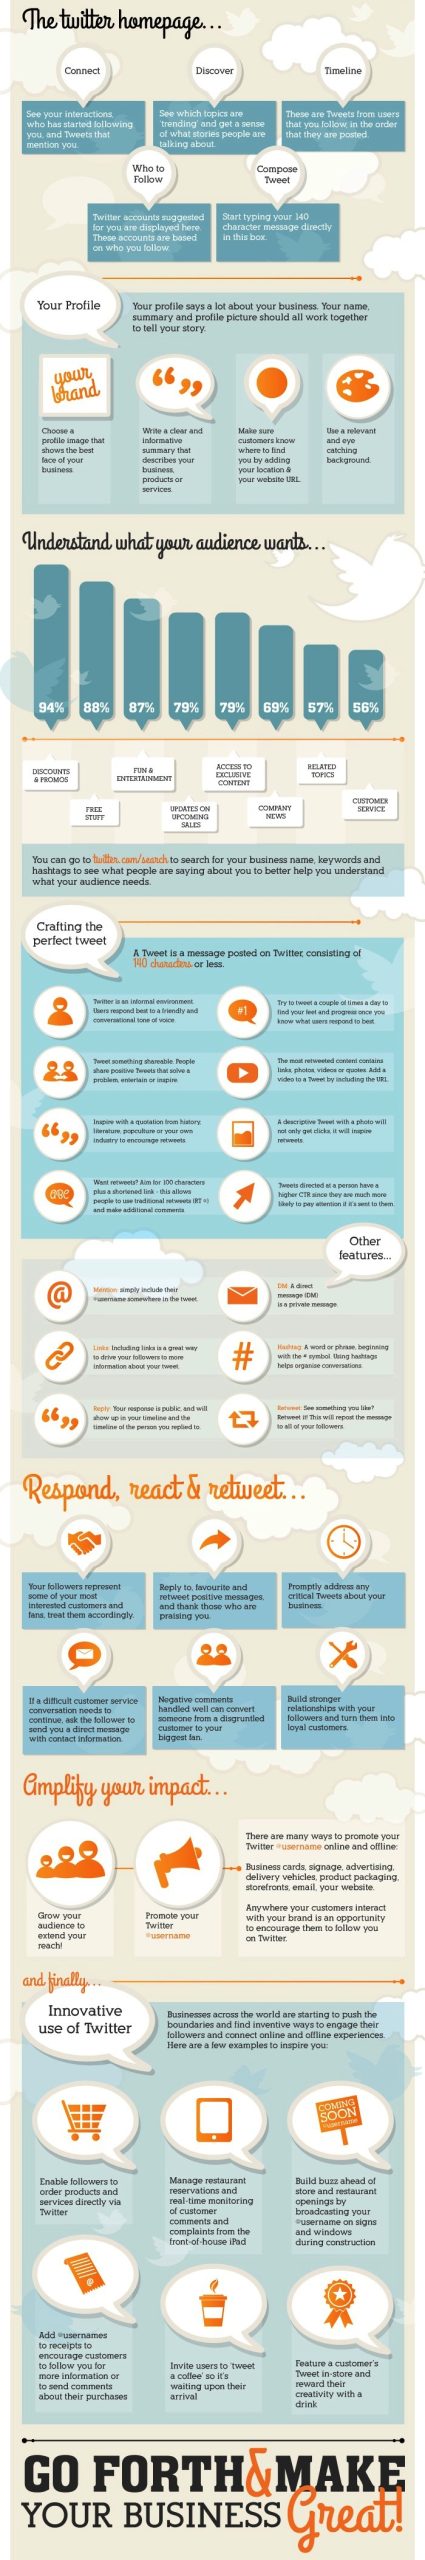 Infographic Business Guide to Twitter